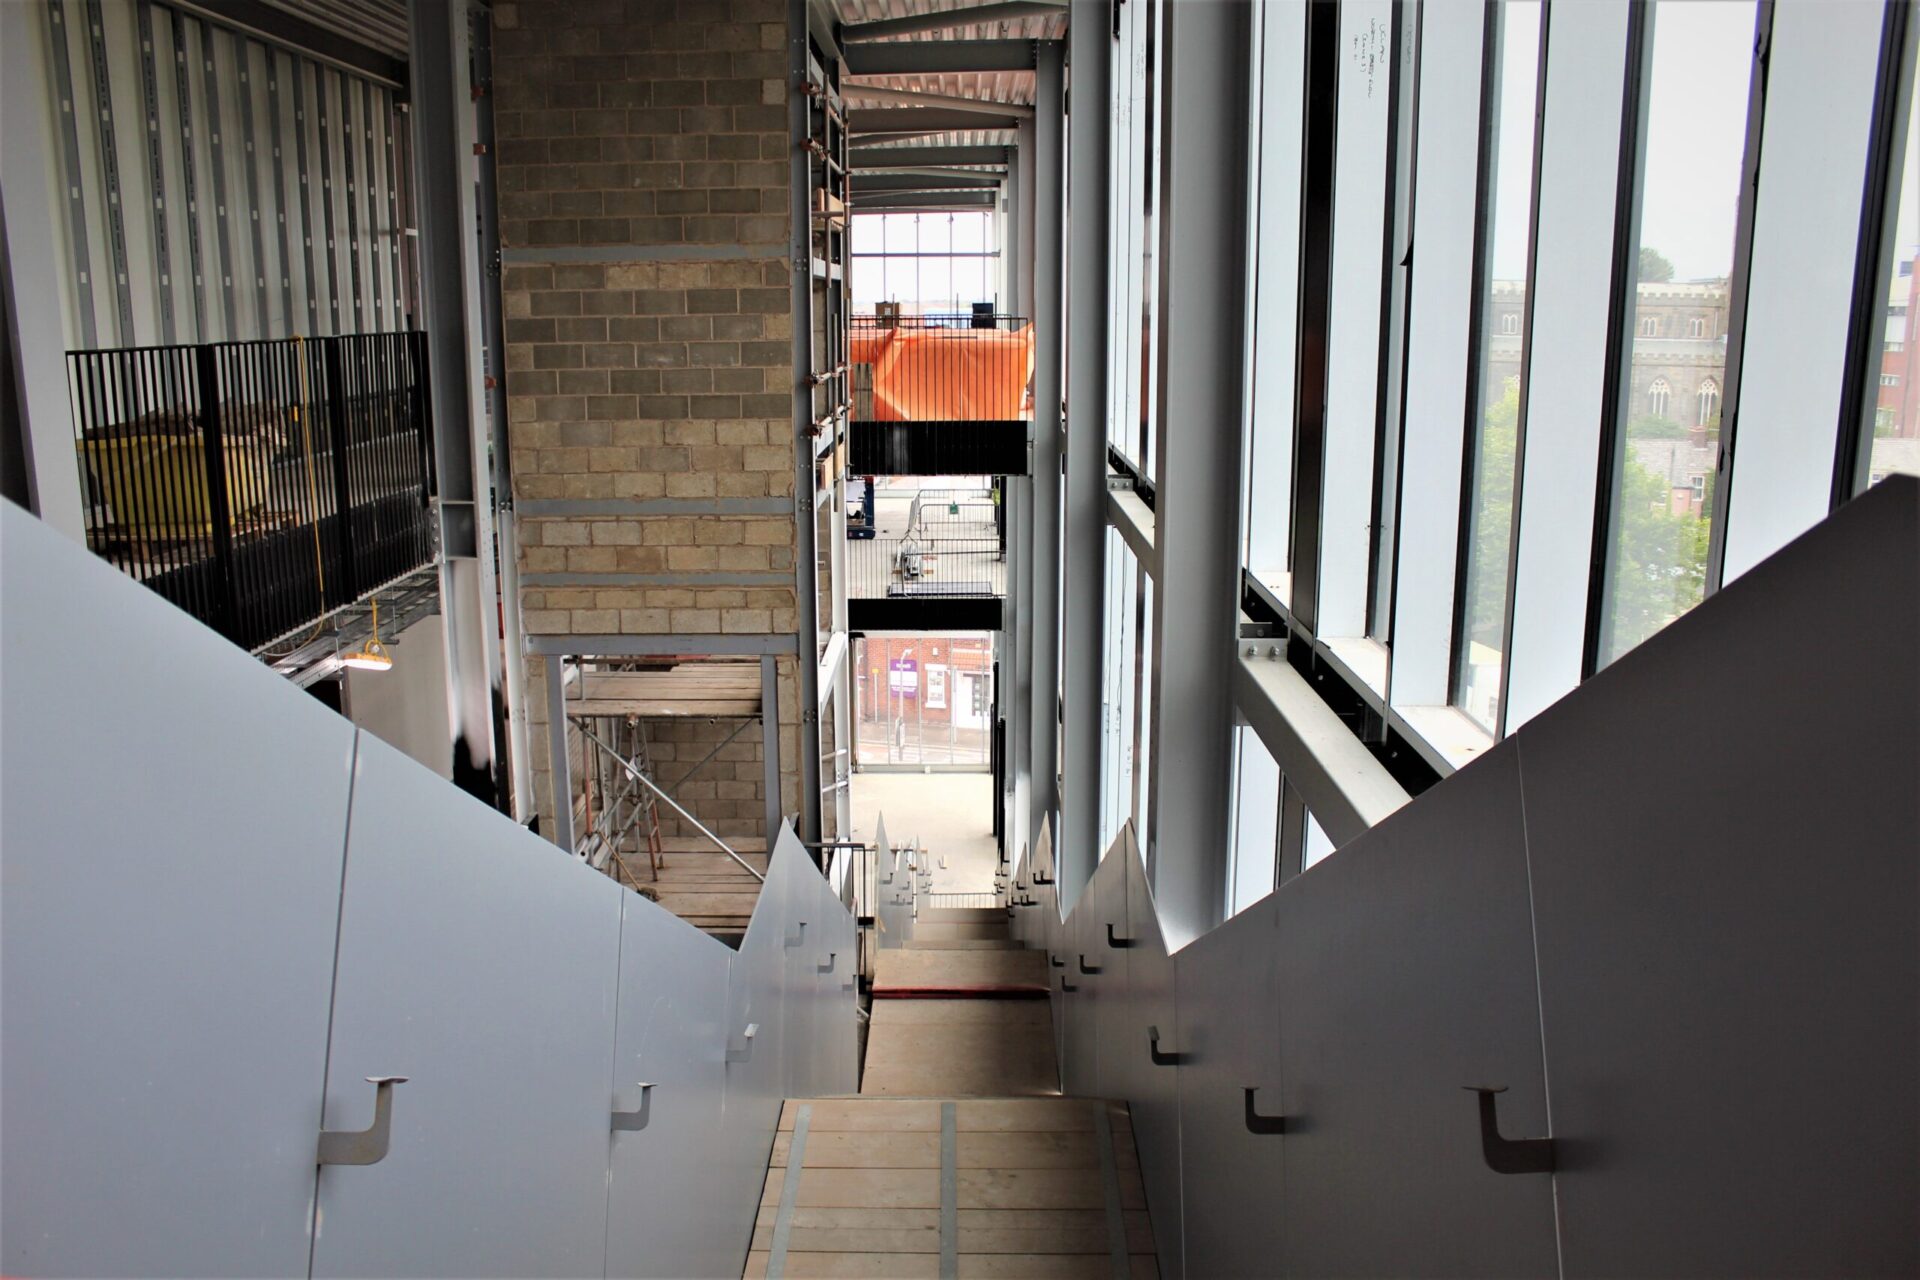 The staircase provides access to teaching space across all levels